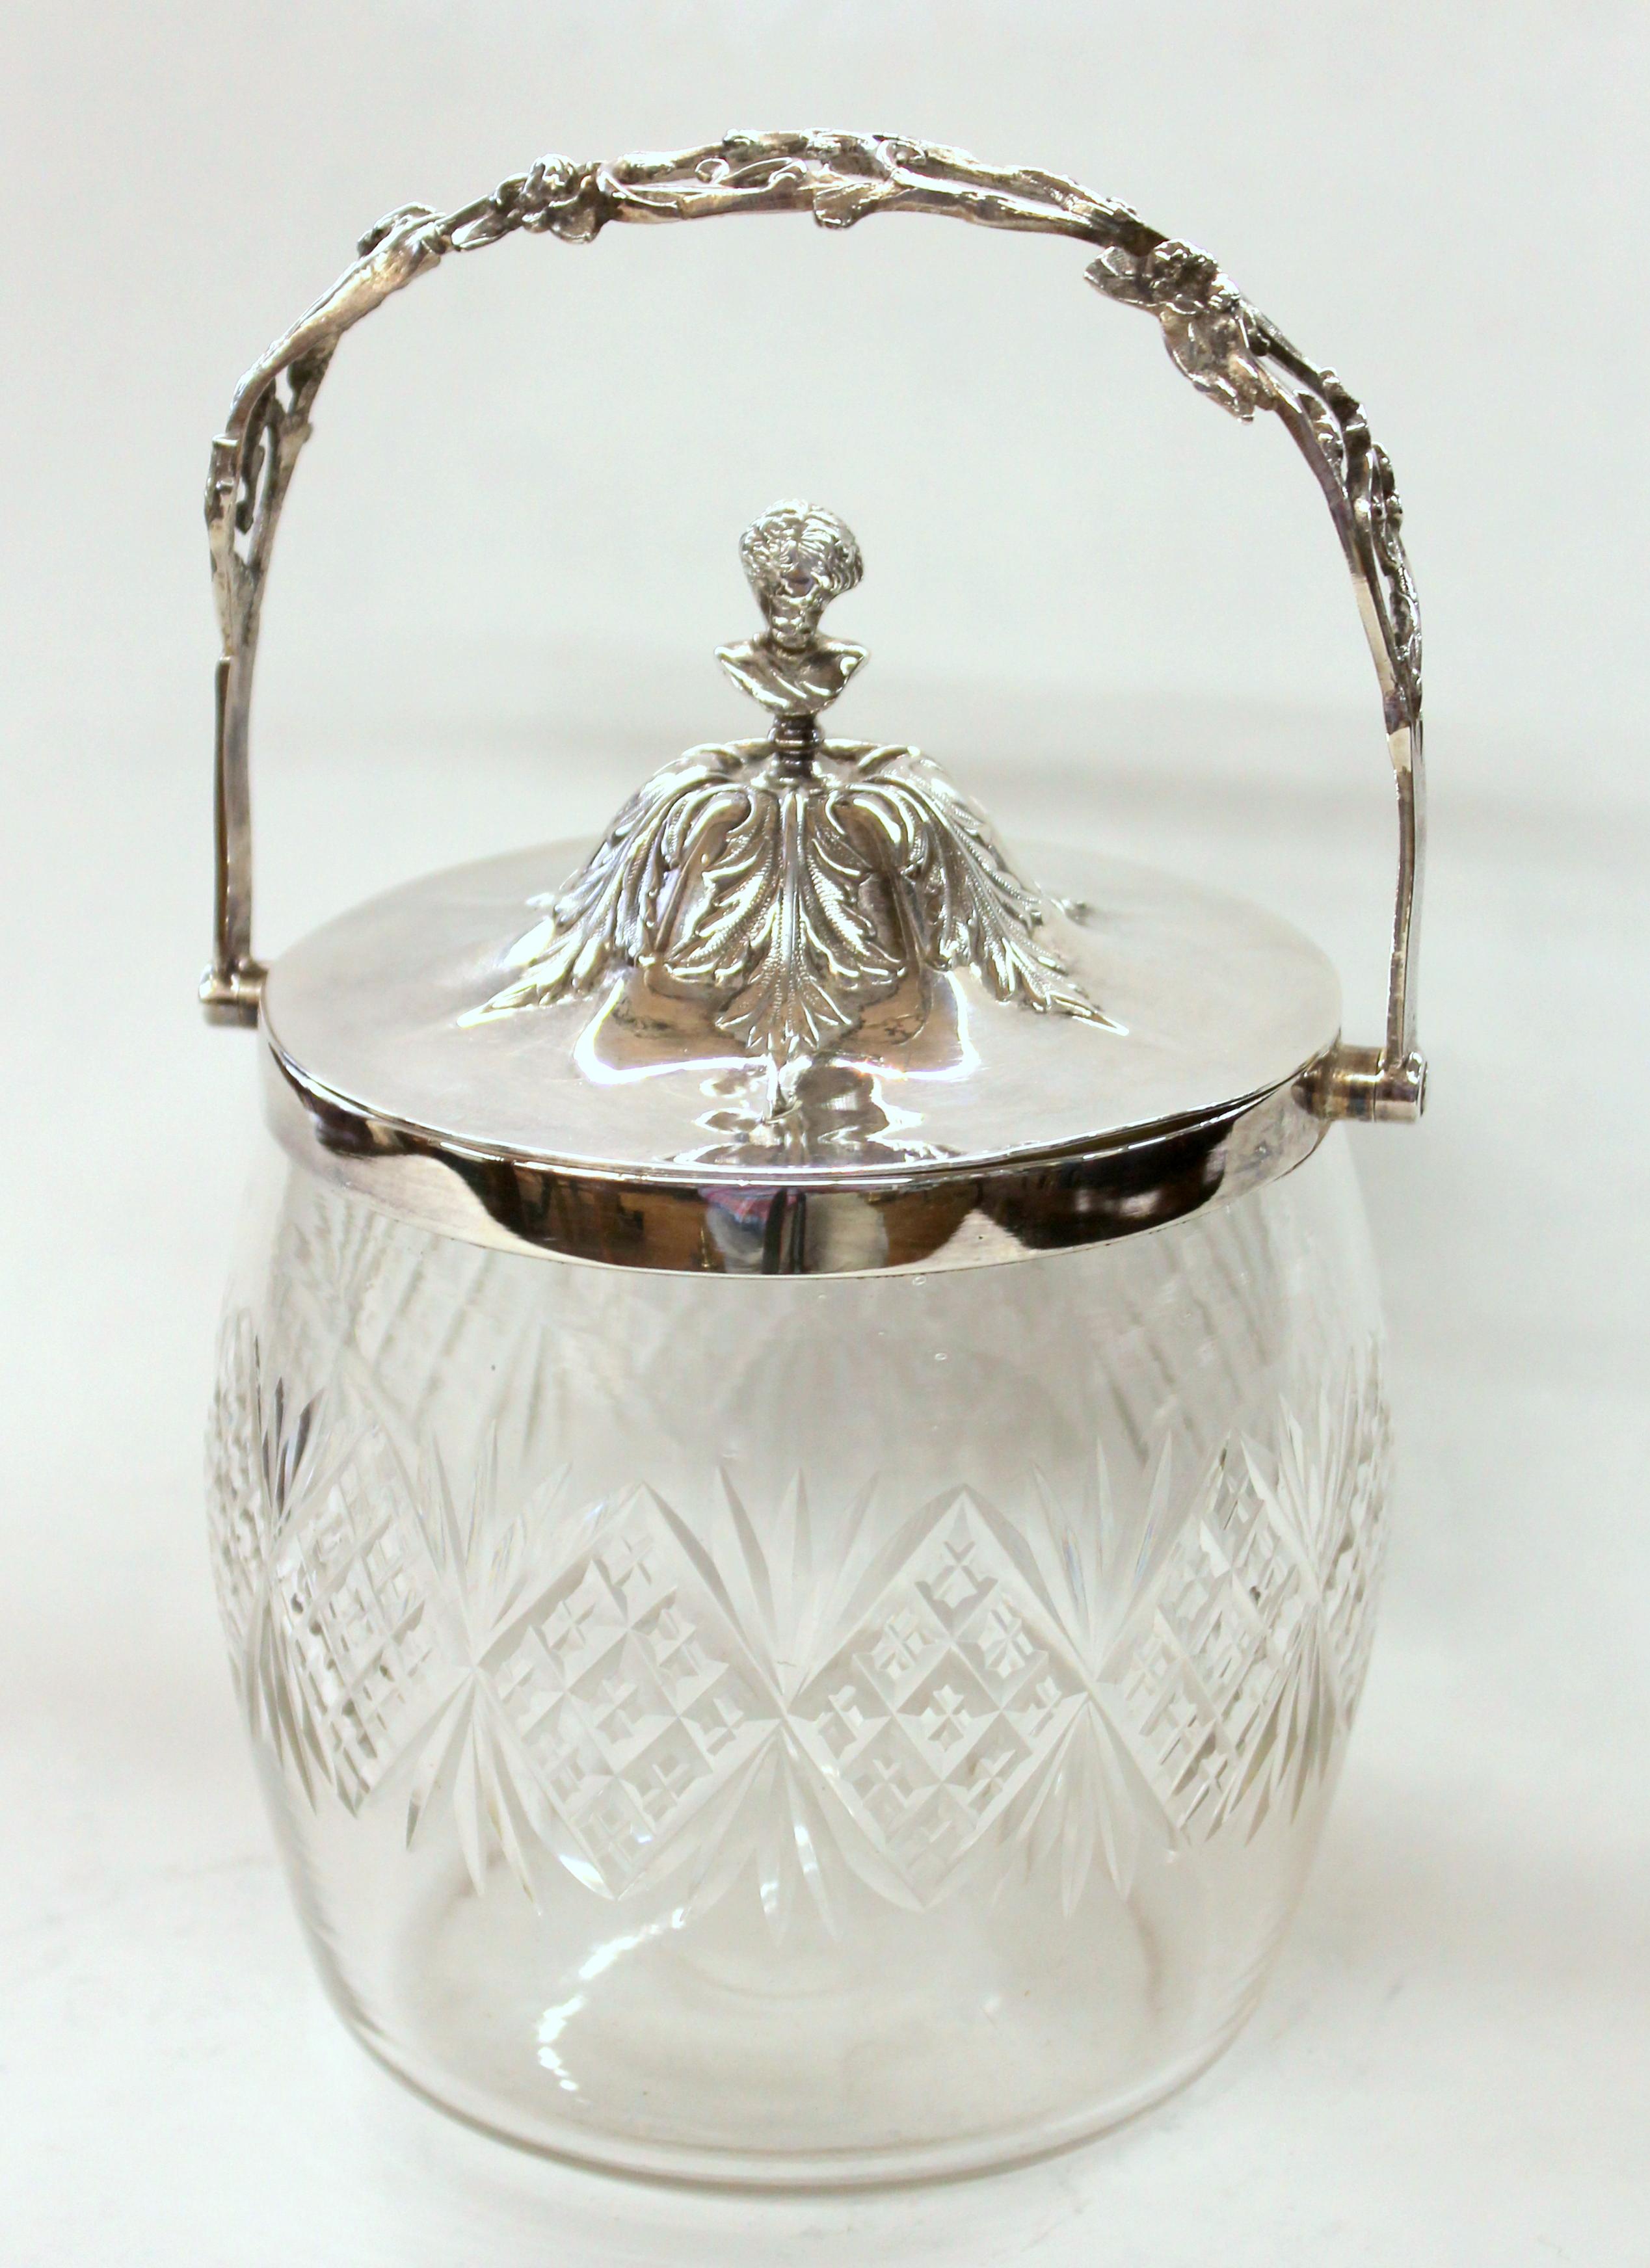 Superb antique English hand chased silver plate and cut crystal covered biscuit barrel or candy box with hand chased lid; lady's bust finial on lid. Nicely hand cut crystal barrel. Pristine condition. No plate loss.
 